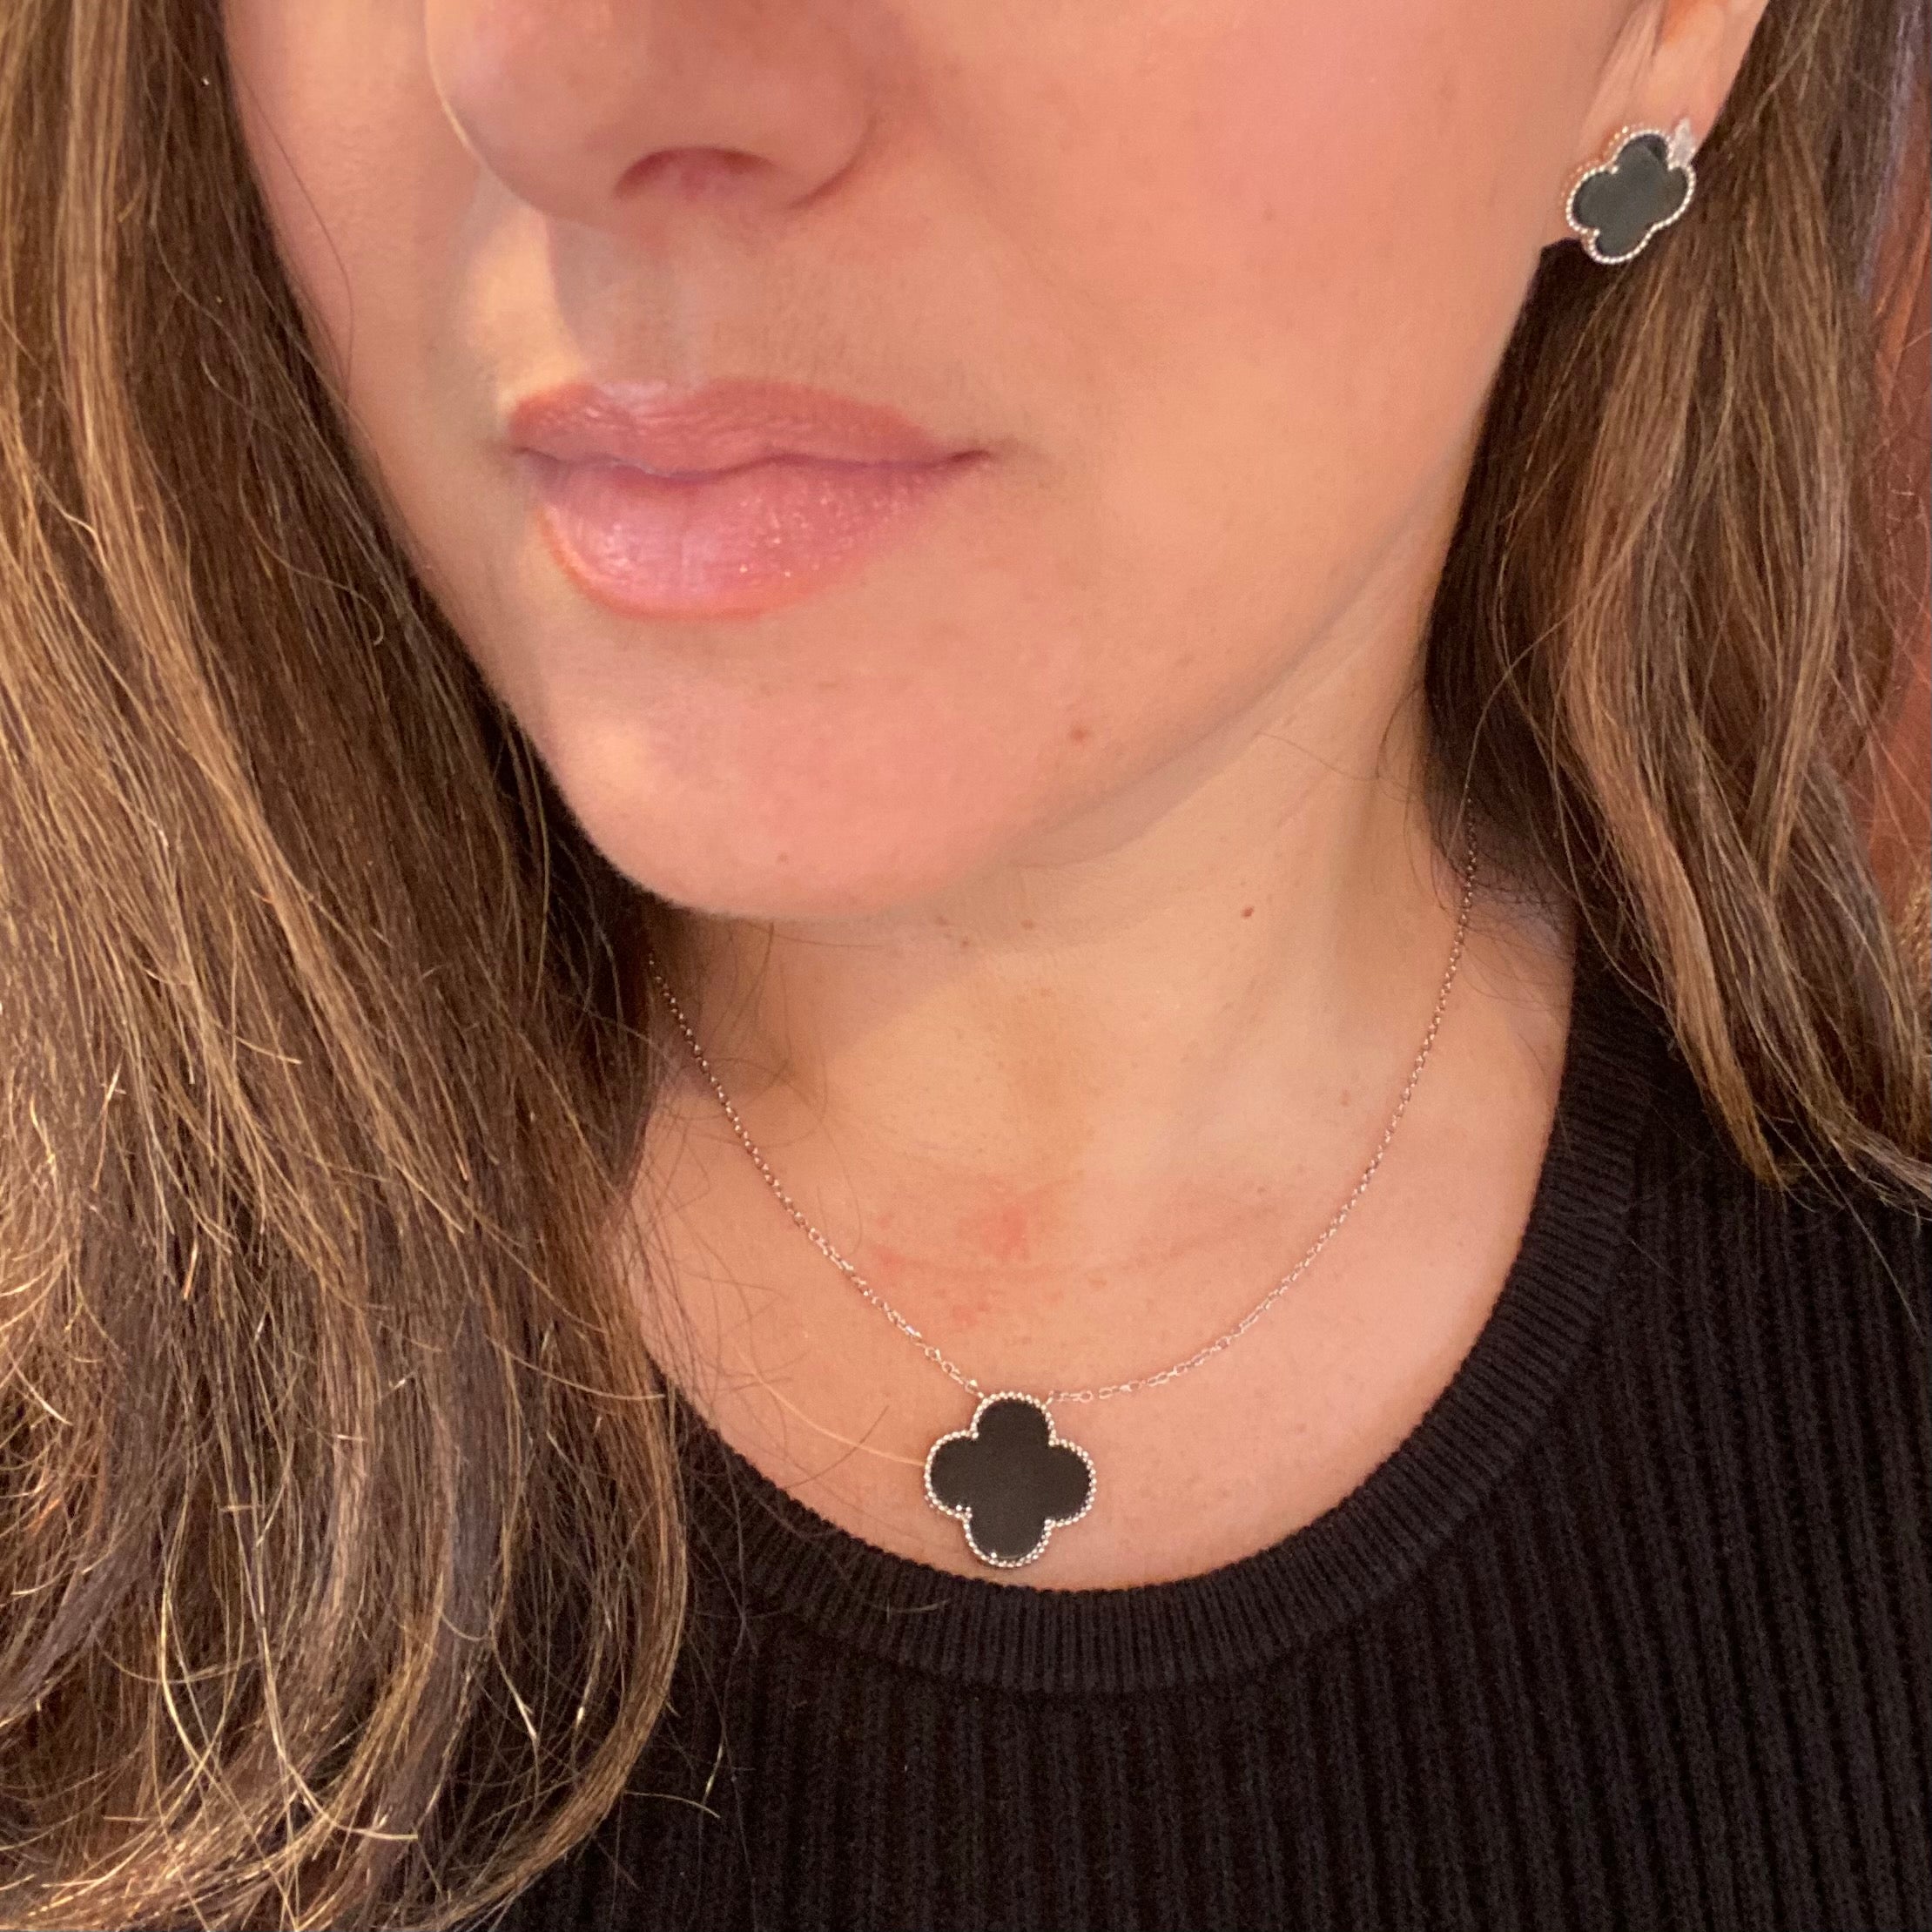 The Gem Garden North County San Diego Finest Jewelry And Gemstone Store.  14k Rose Gold Diamond & Black Onyx Clover Necklace